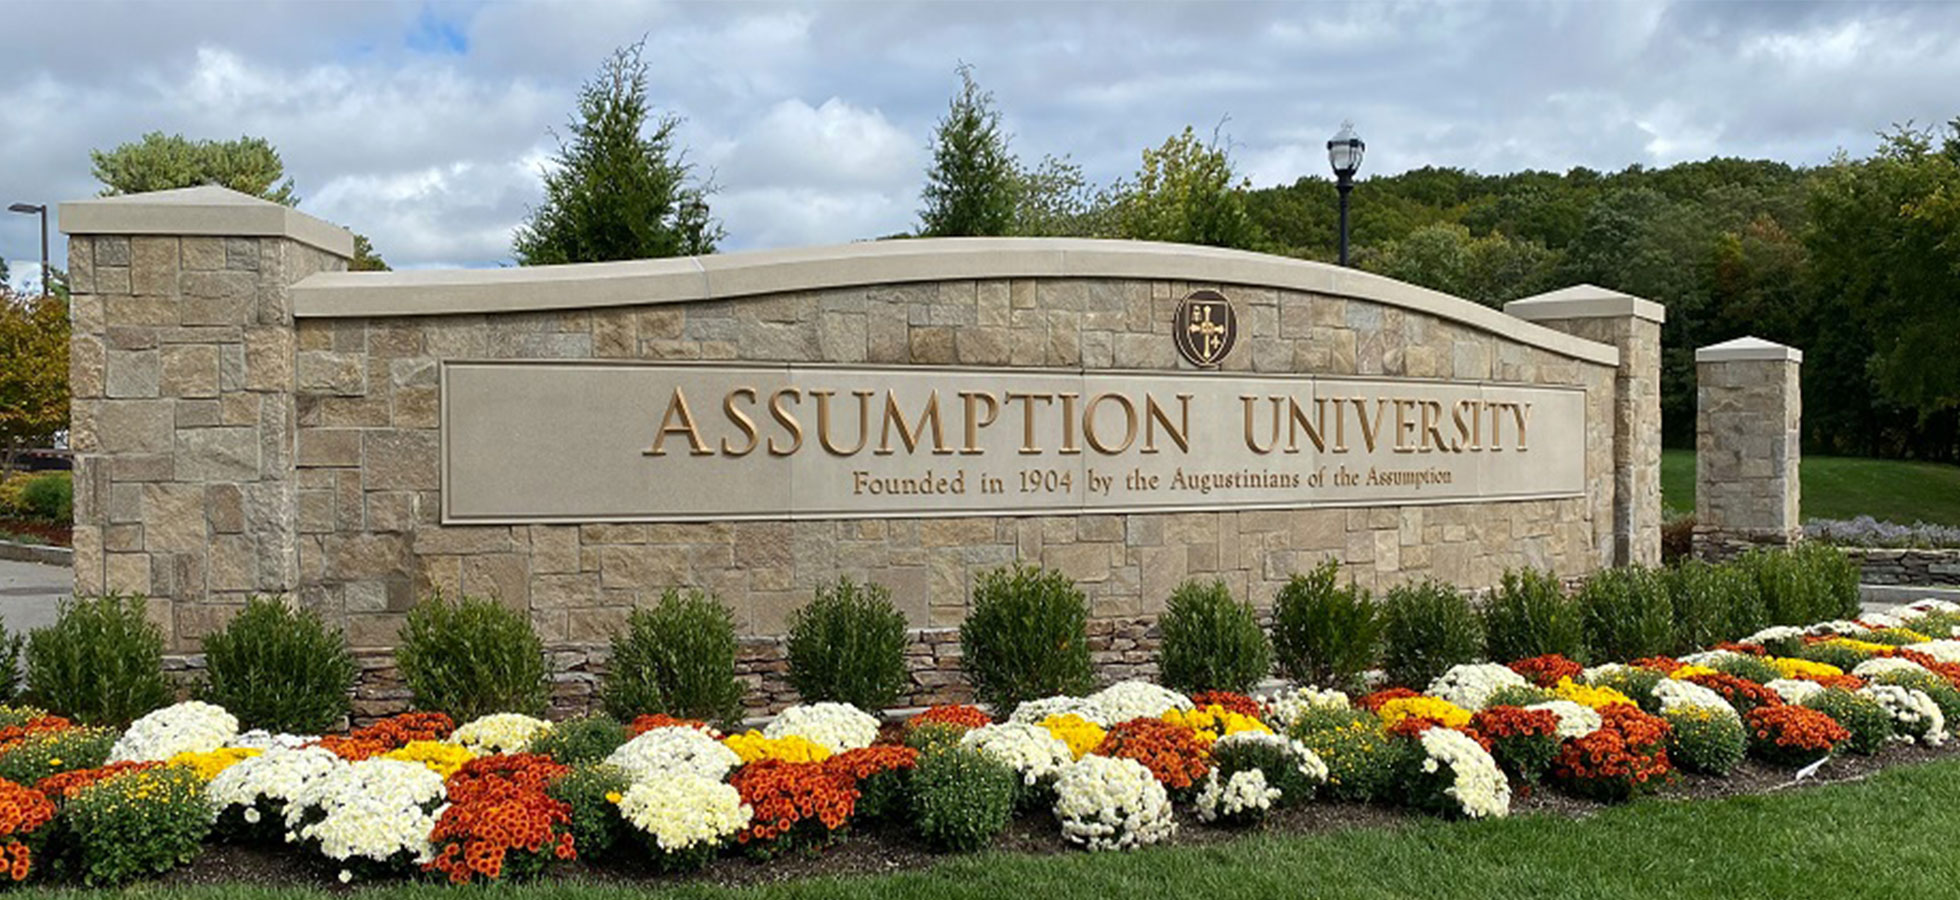 Assumption University Sign Located at Front of Campus